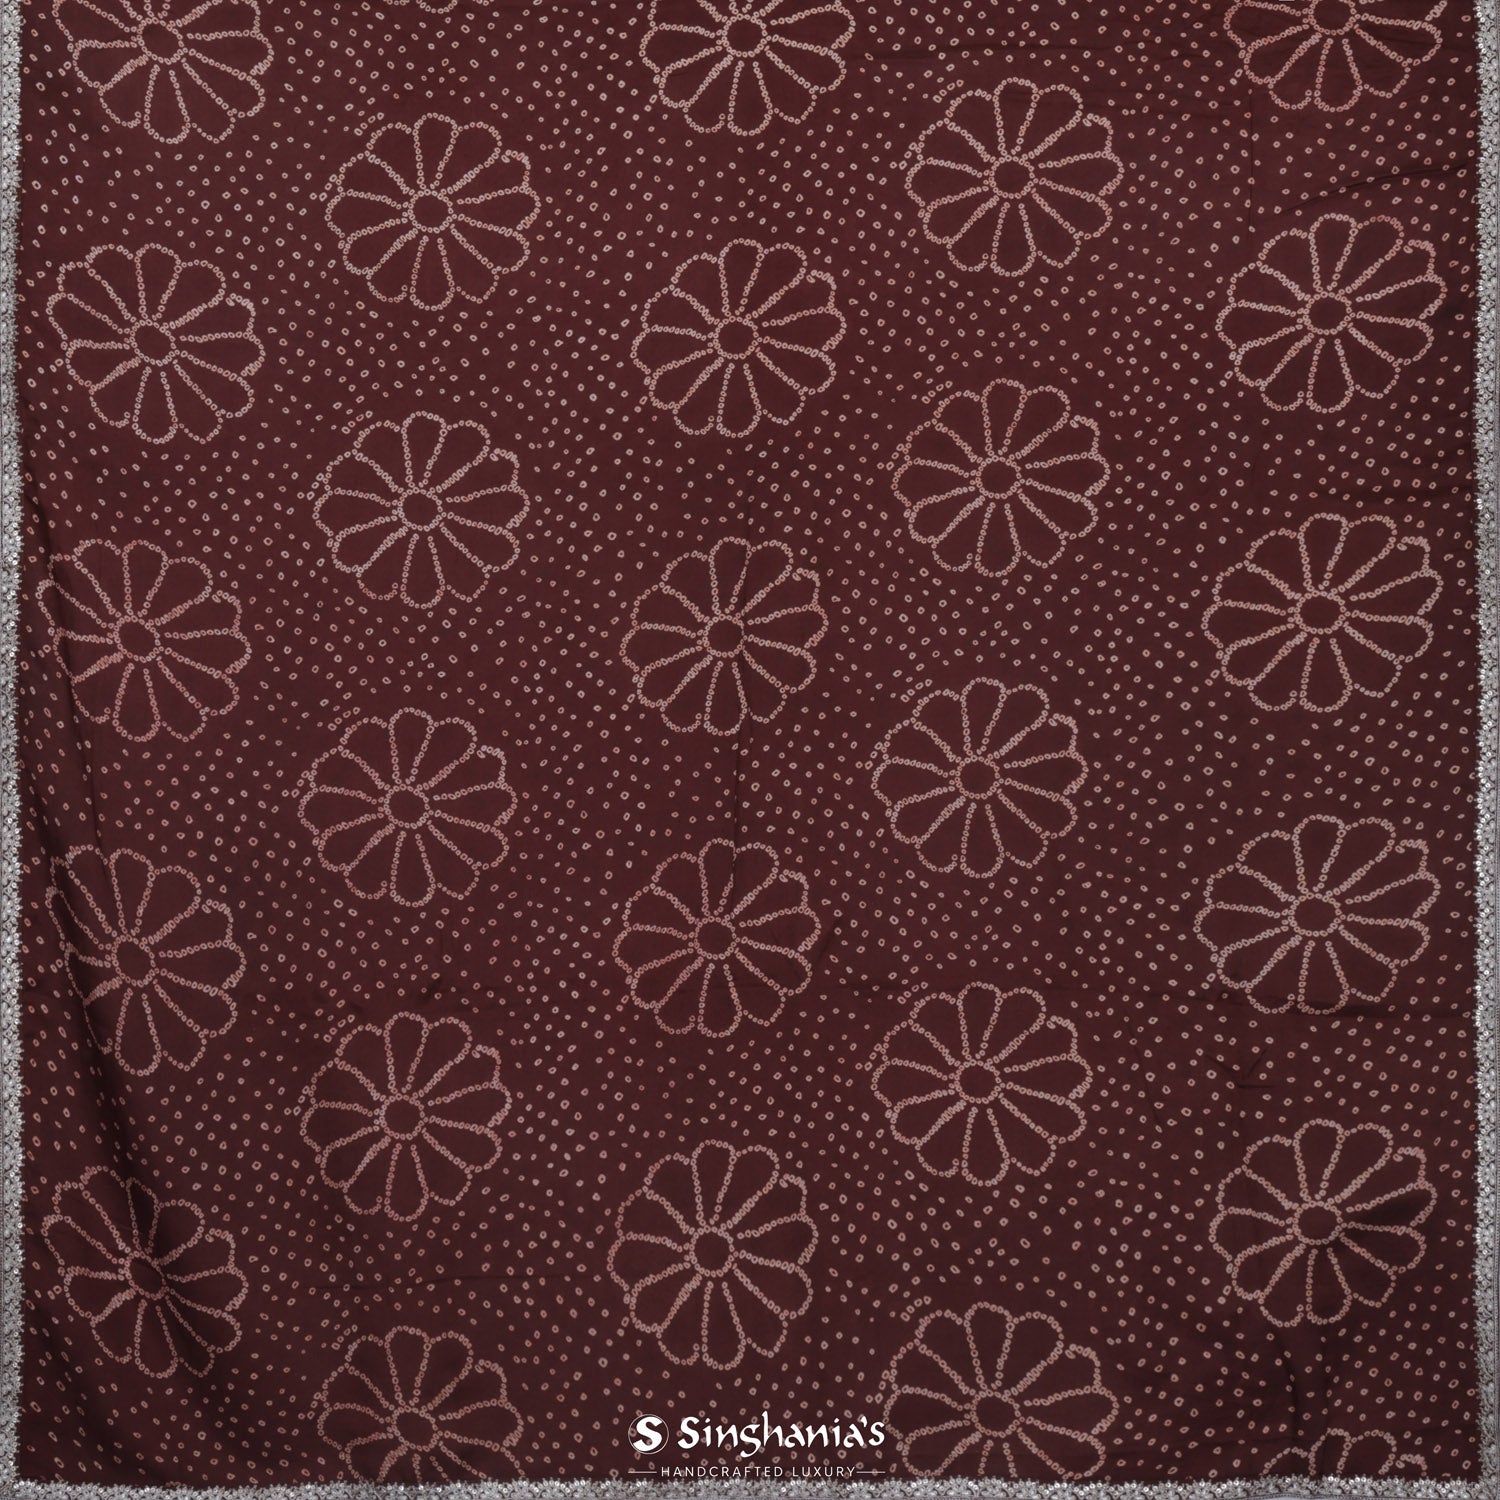 Coffee Brown Printed Silk Saree With Bandhani Pattern And Sequin Embroidery Border